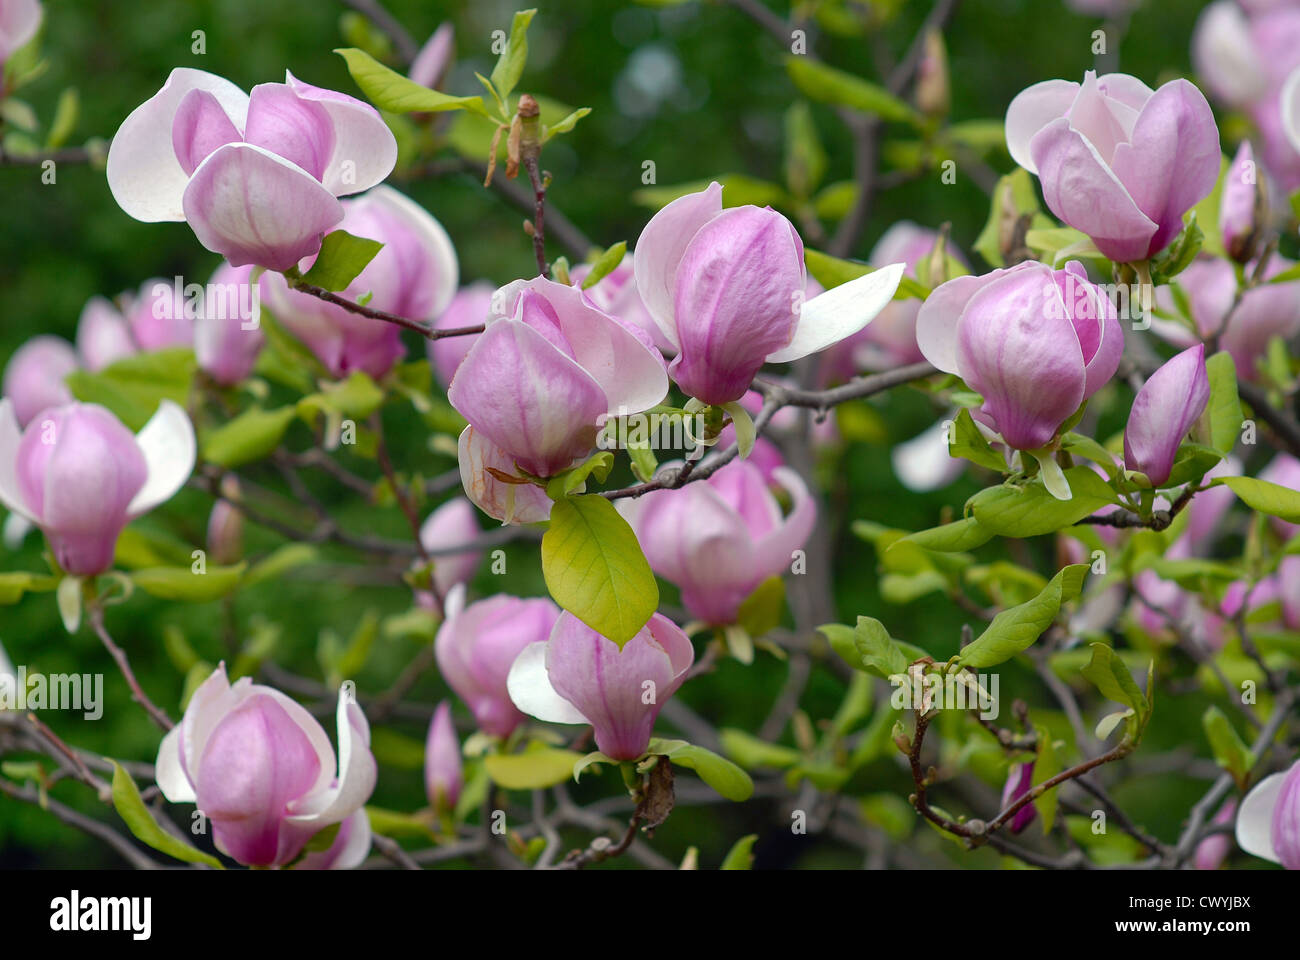 Blossoming magnolia against a green grass Stock Photo